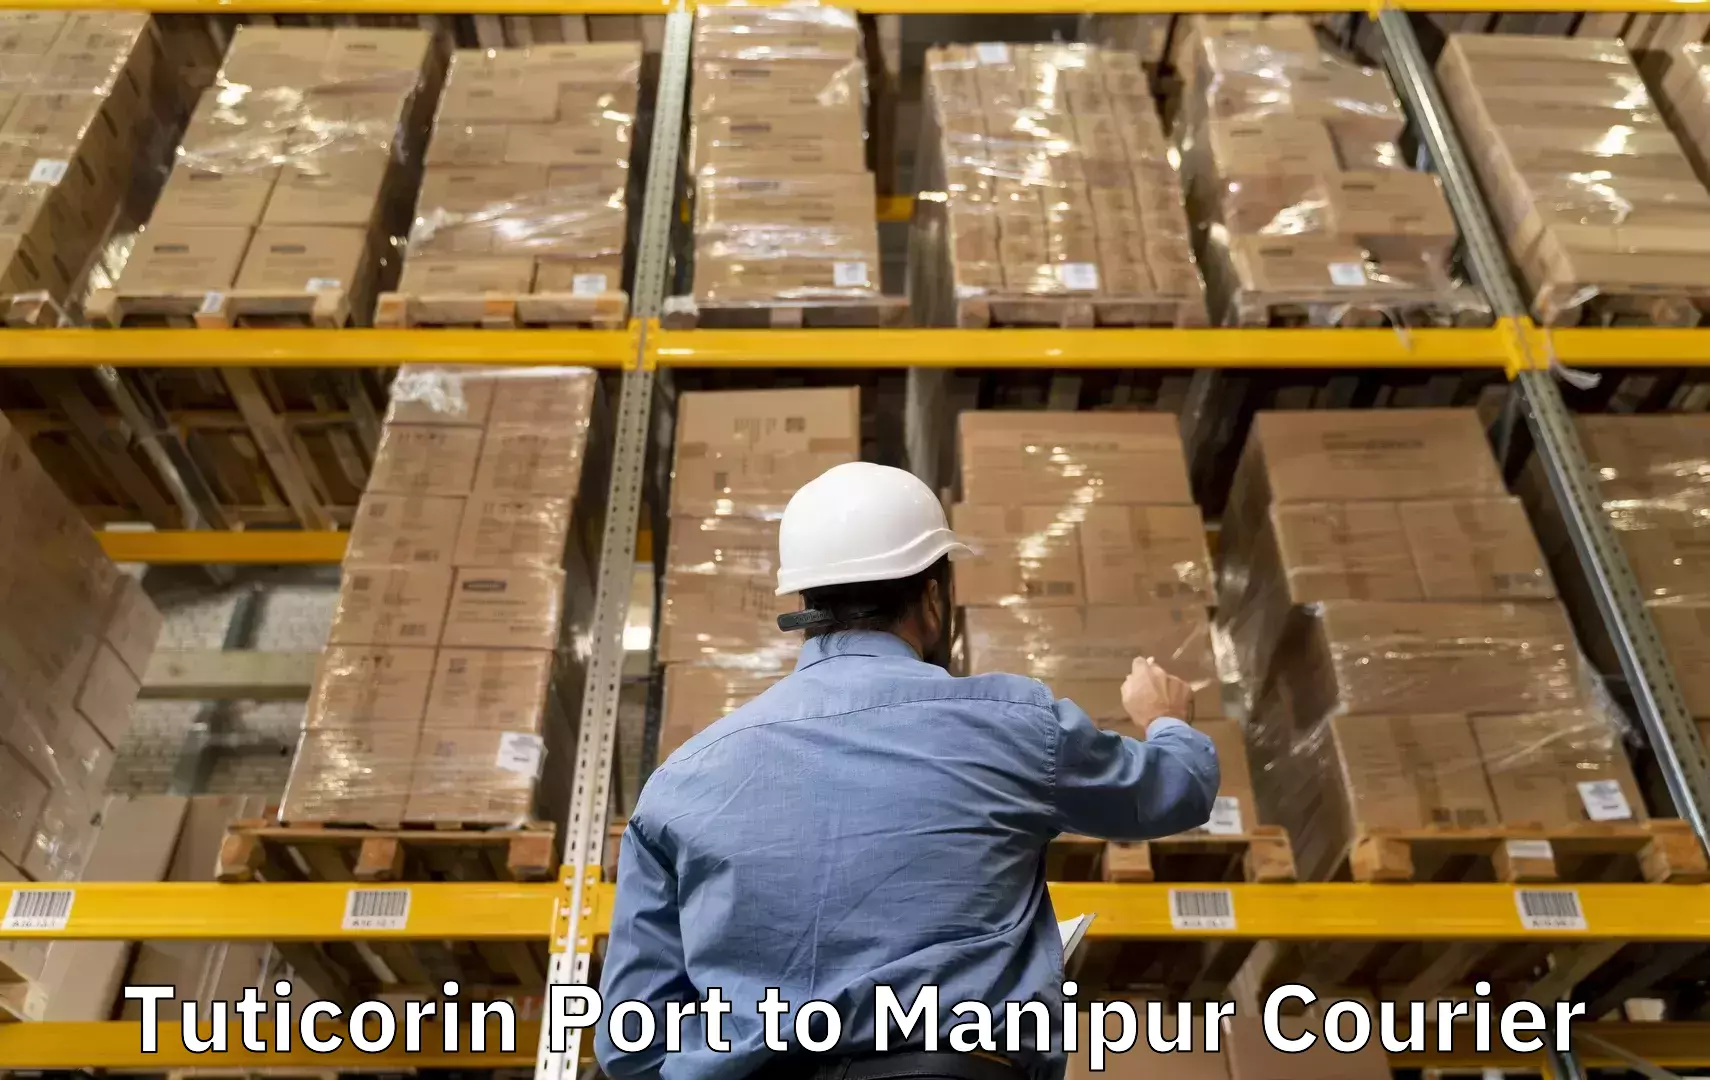 Luggage shipment specialists Tuticorin Port to Tamenglong